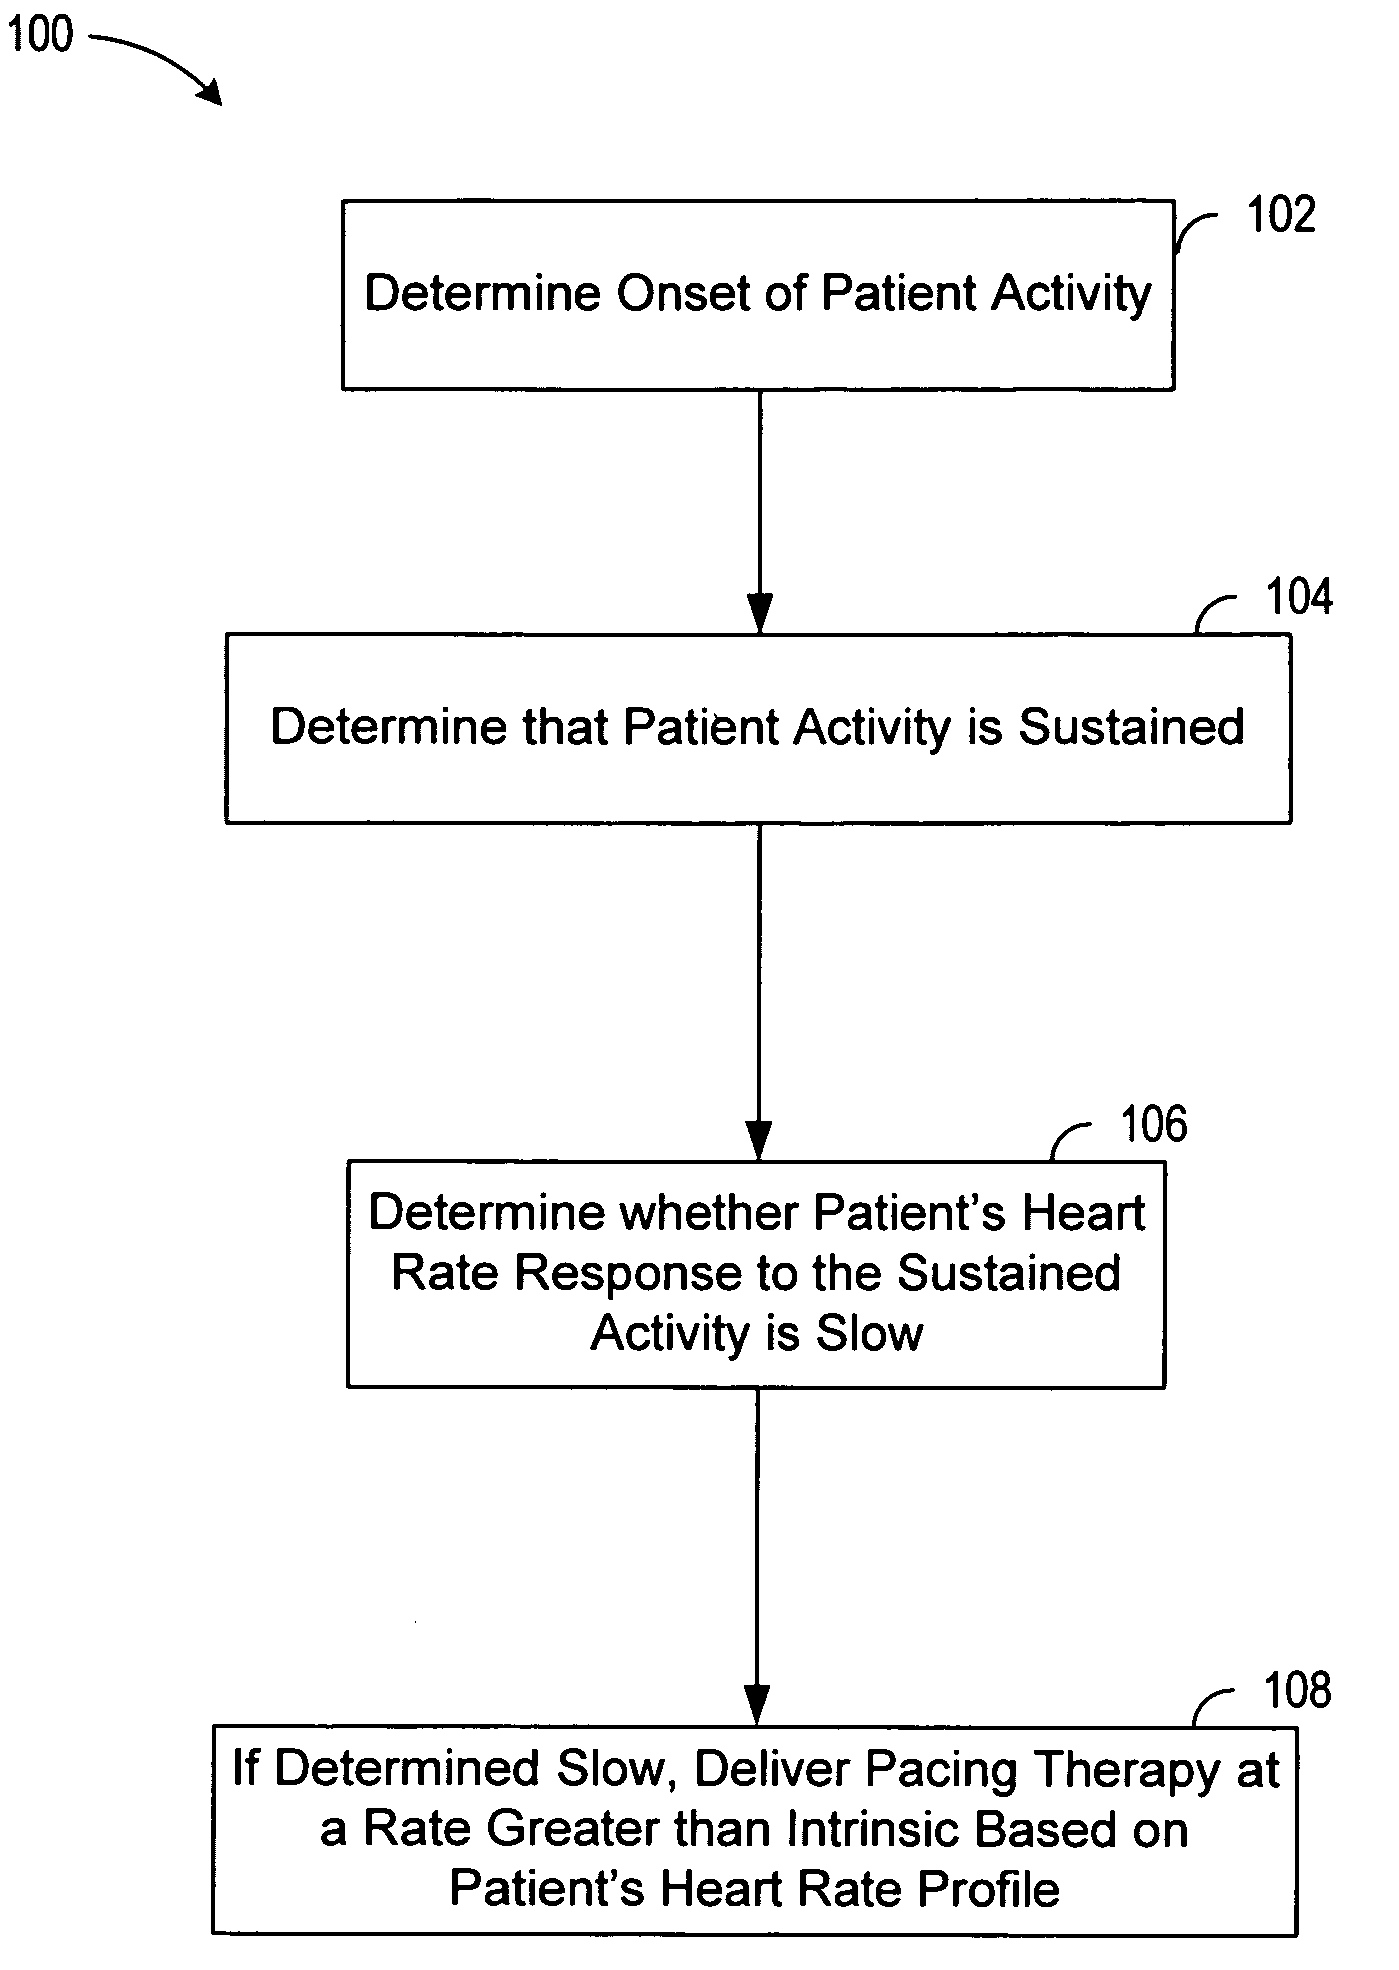 Systems and methods for improving heart rate kinetics in heart failure patients